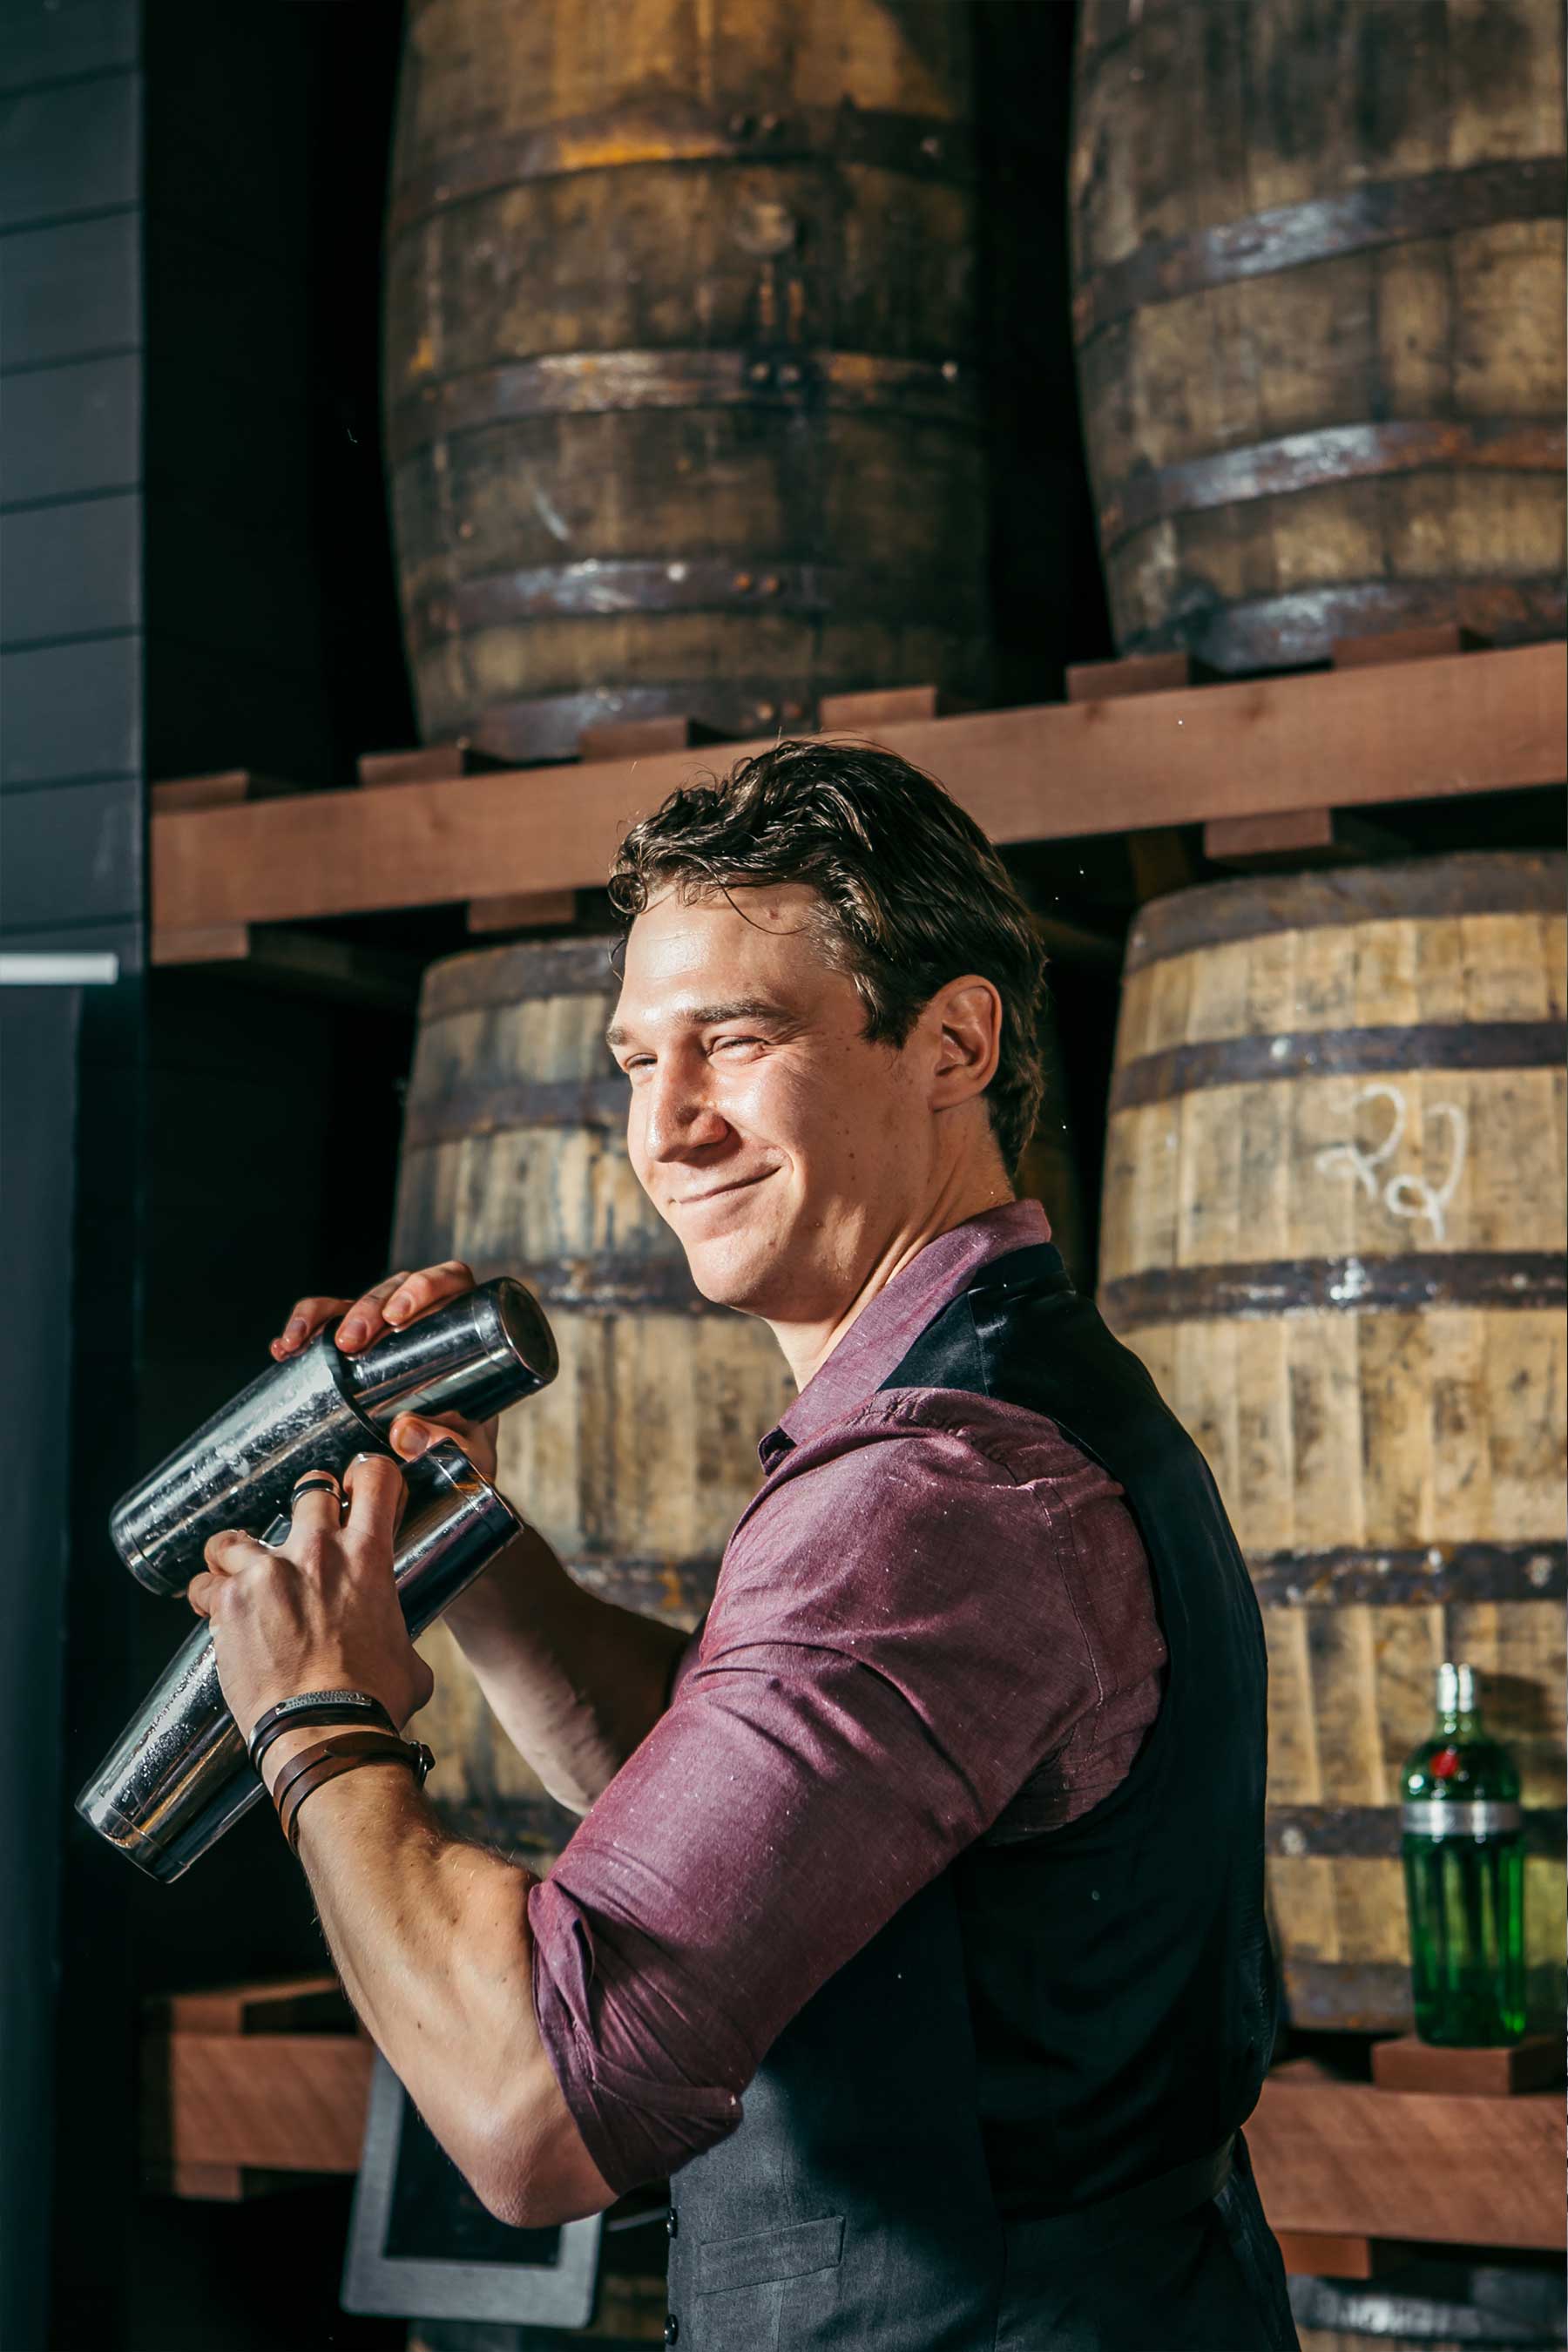 USBG and Diageo Announce Adam Fournier as the 2021 U.S. World Class Bartender of the Year